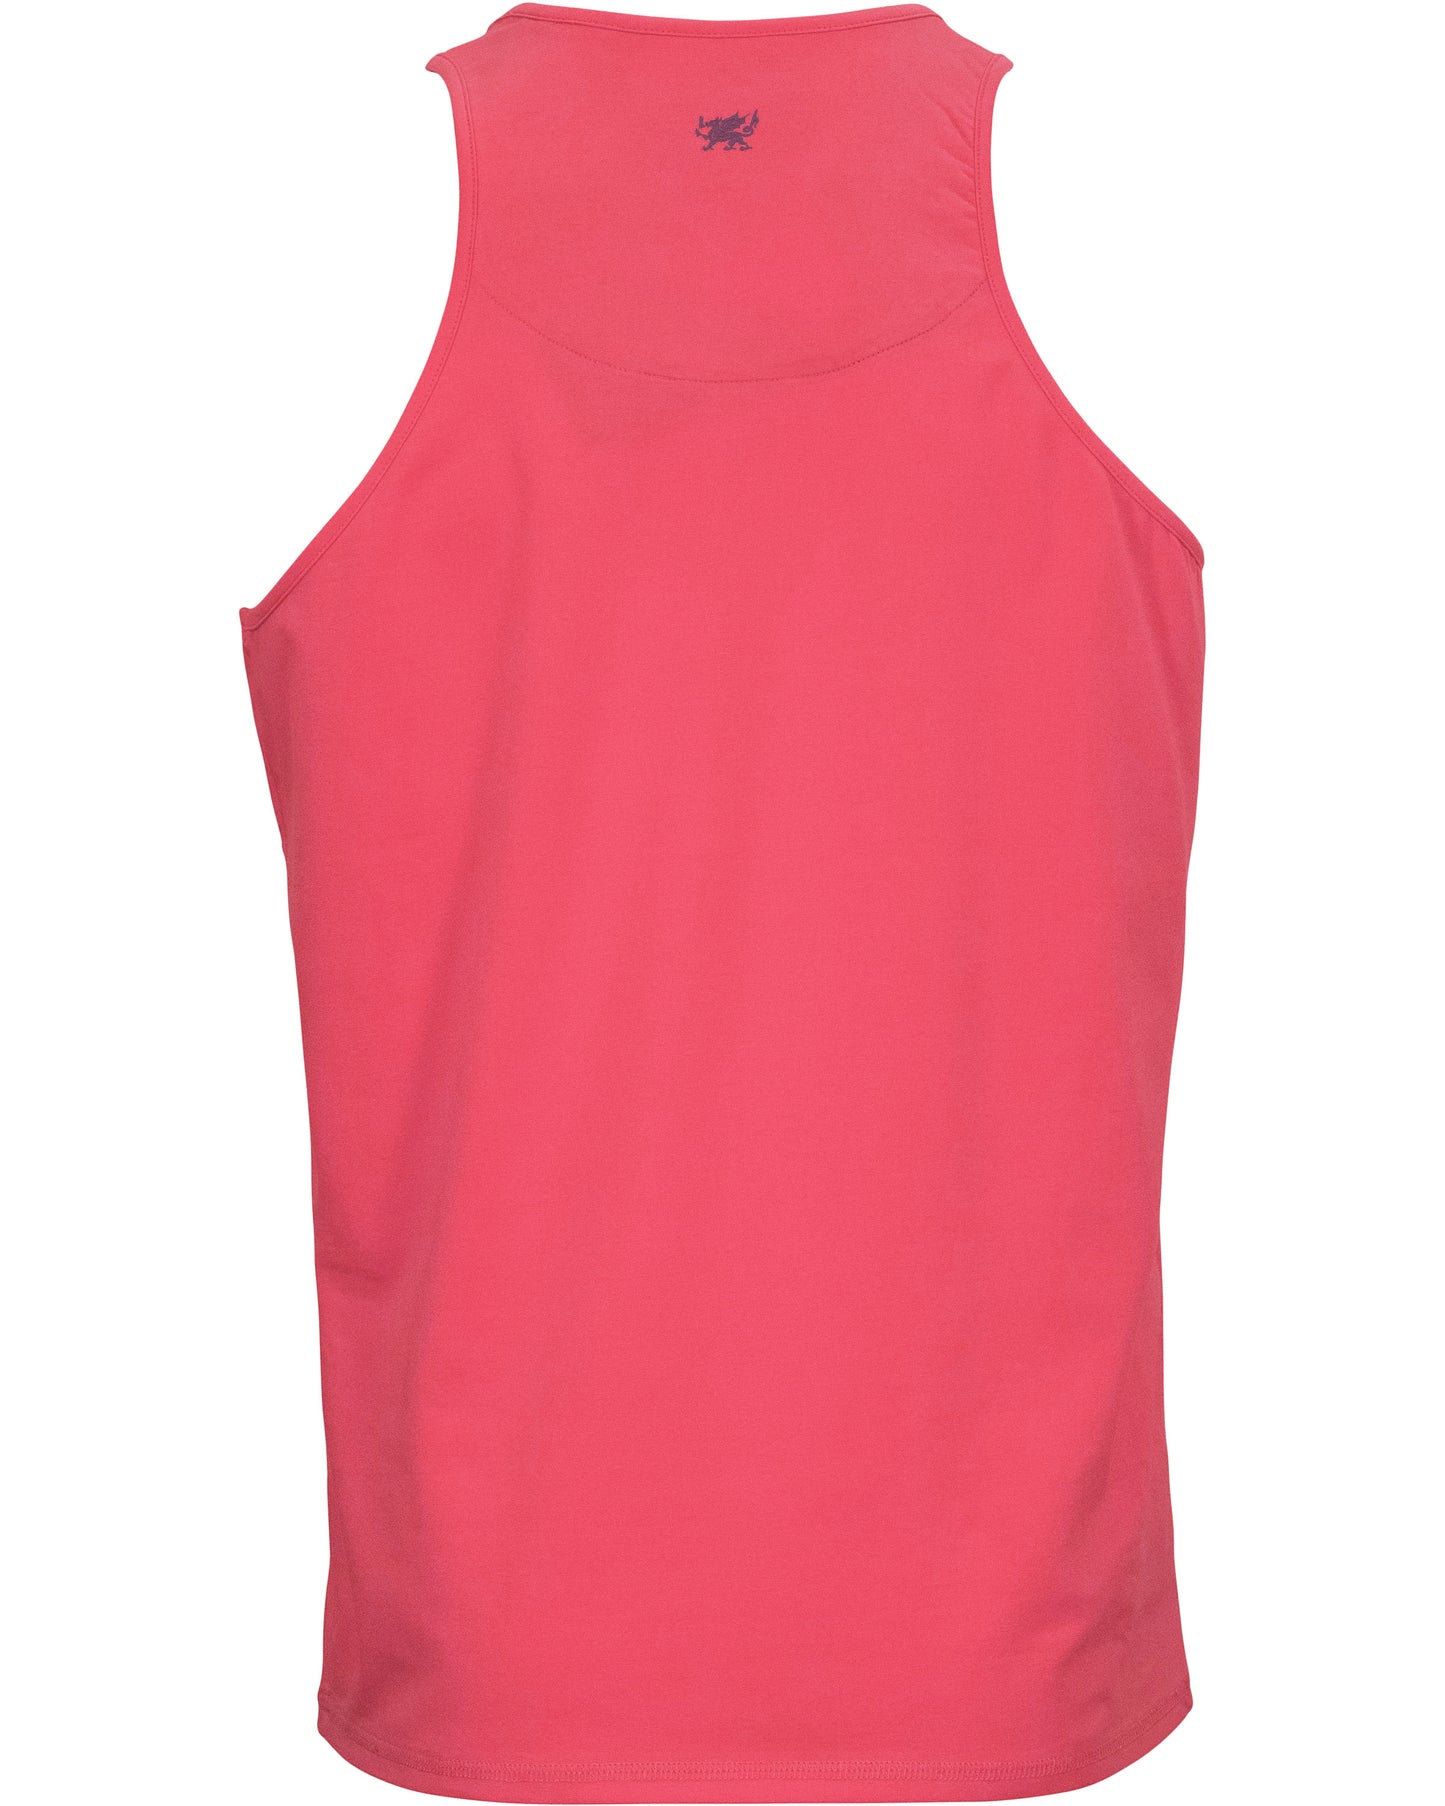 TEDFORD EMBOSSED FLORAL TANK - MELON